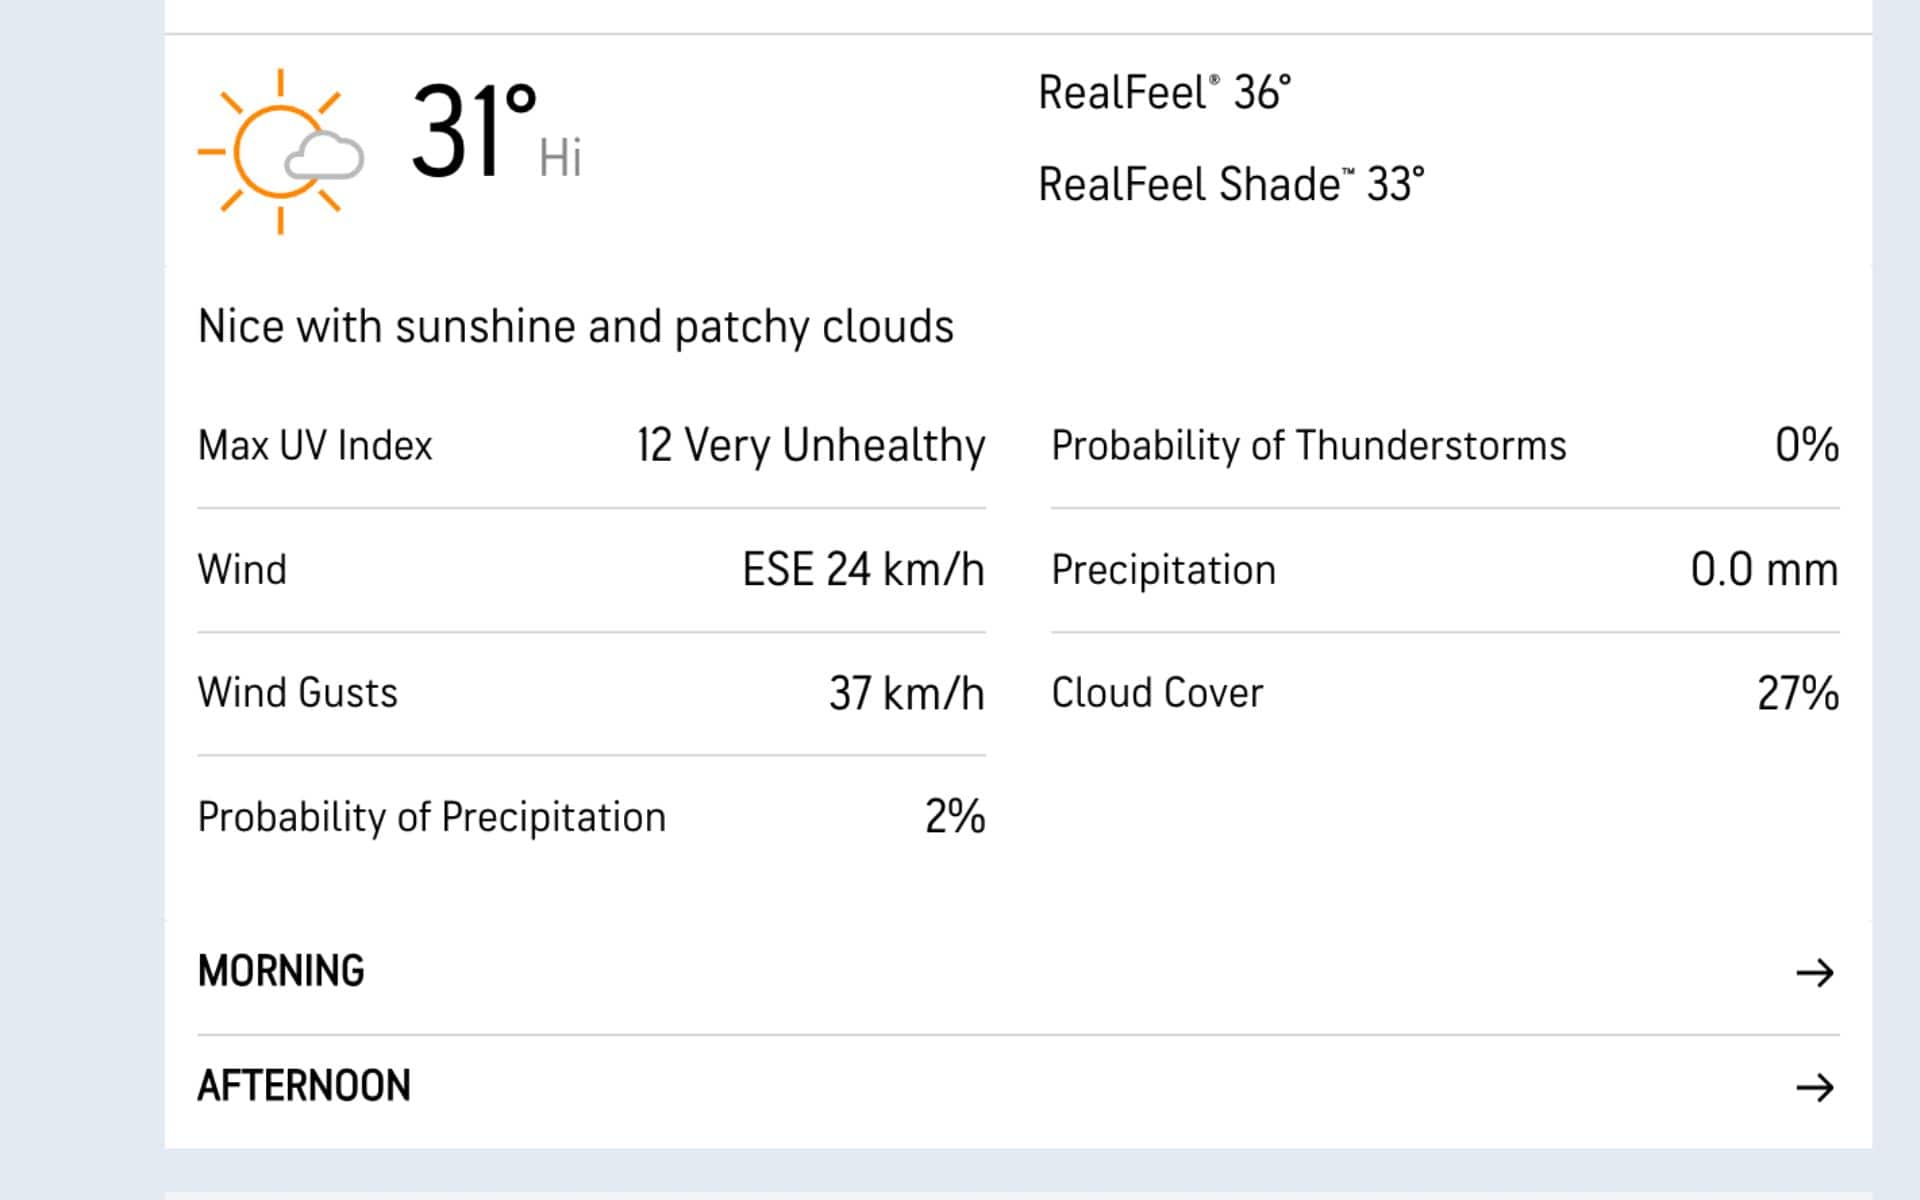 Weather Report For SA vs NEP (accuweather.com)